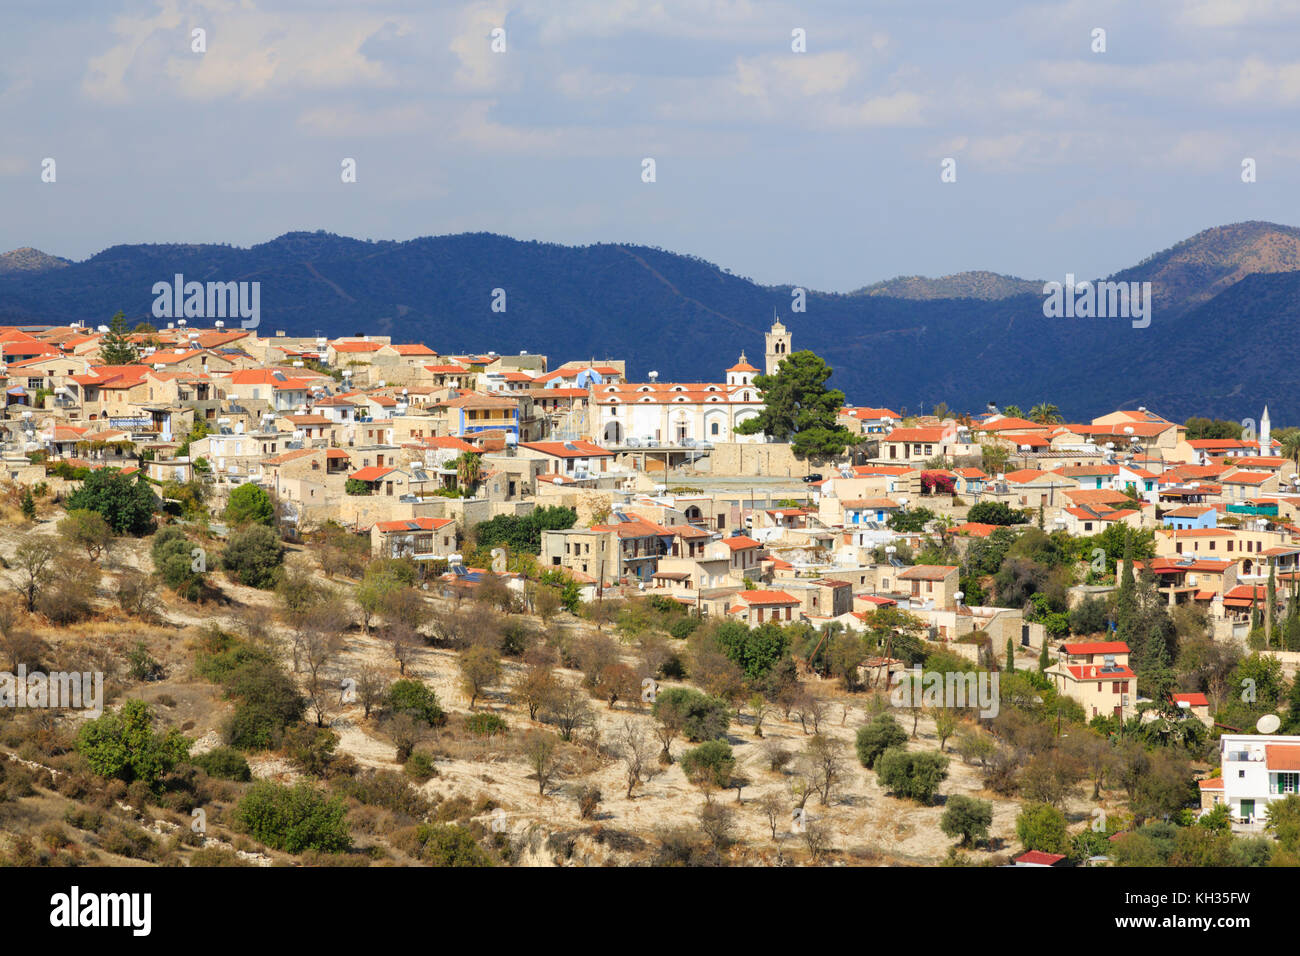 Pano Lefkara village, famous for lacework and silverwork, Troodos hills, Cyprus.Cyprus Stock Photo